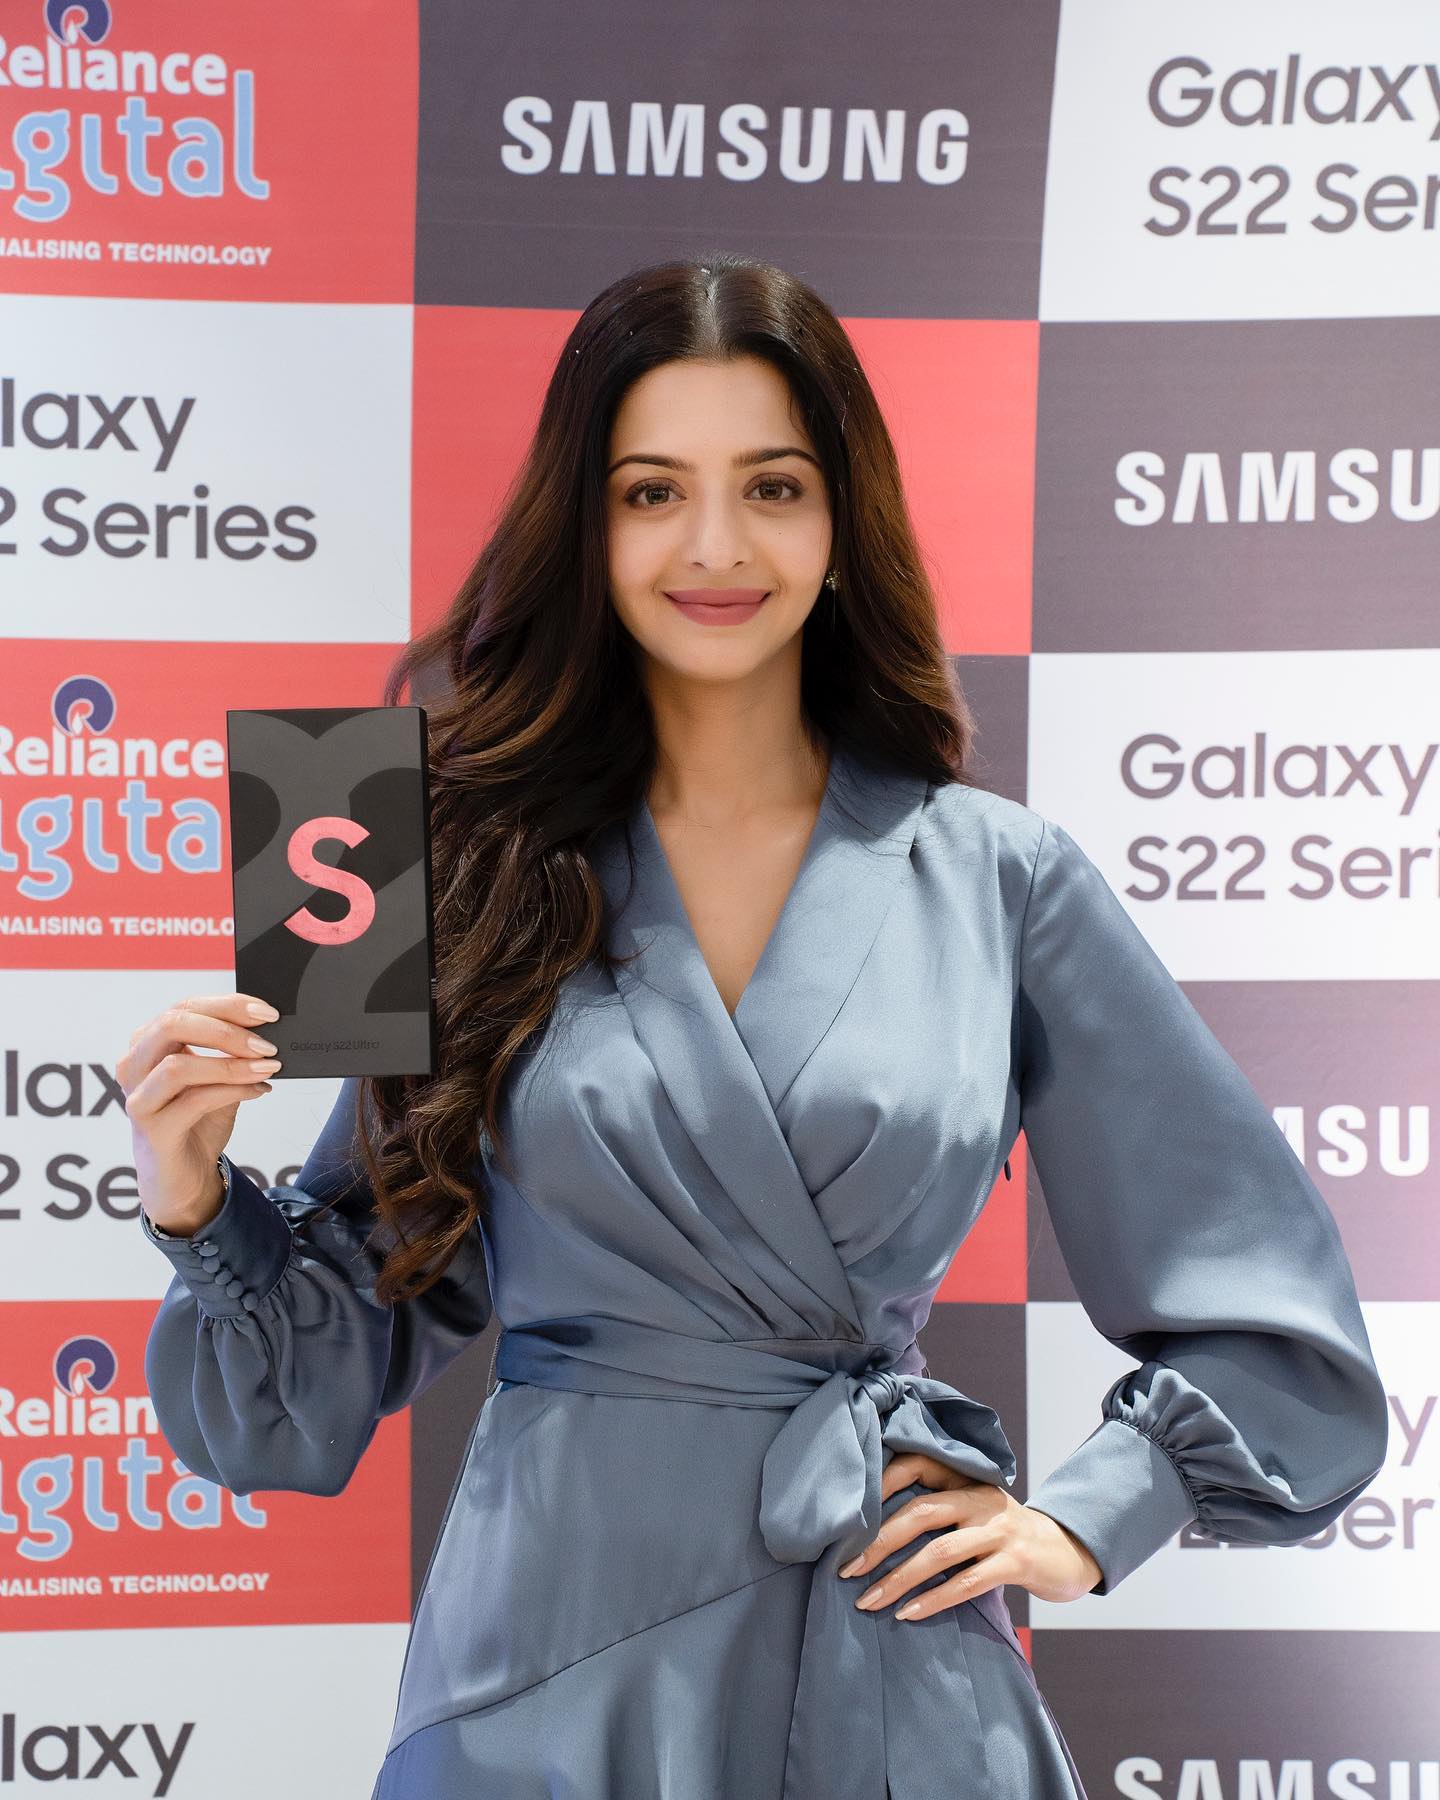 Vedhika launchs Samsung S22 series at the Reliance Digital store, Bangalore